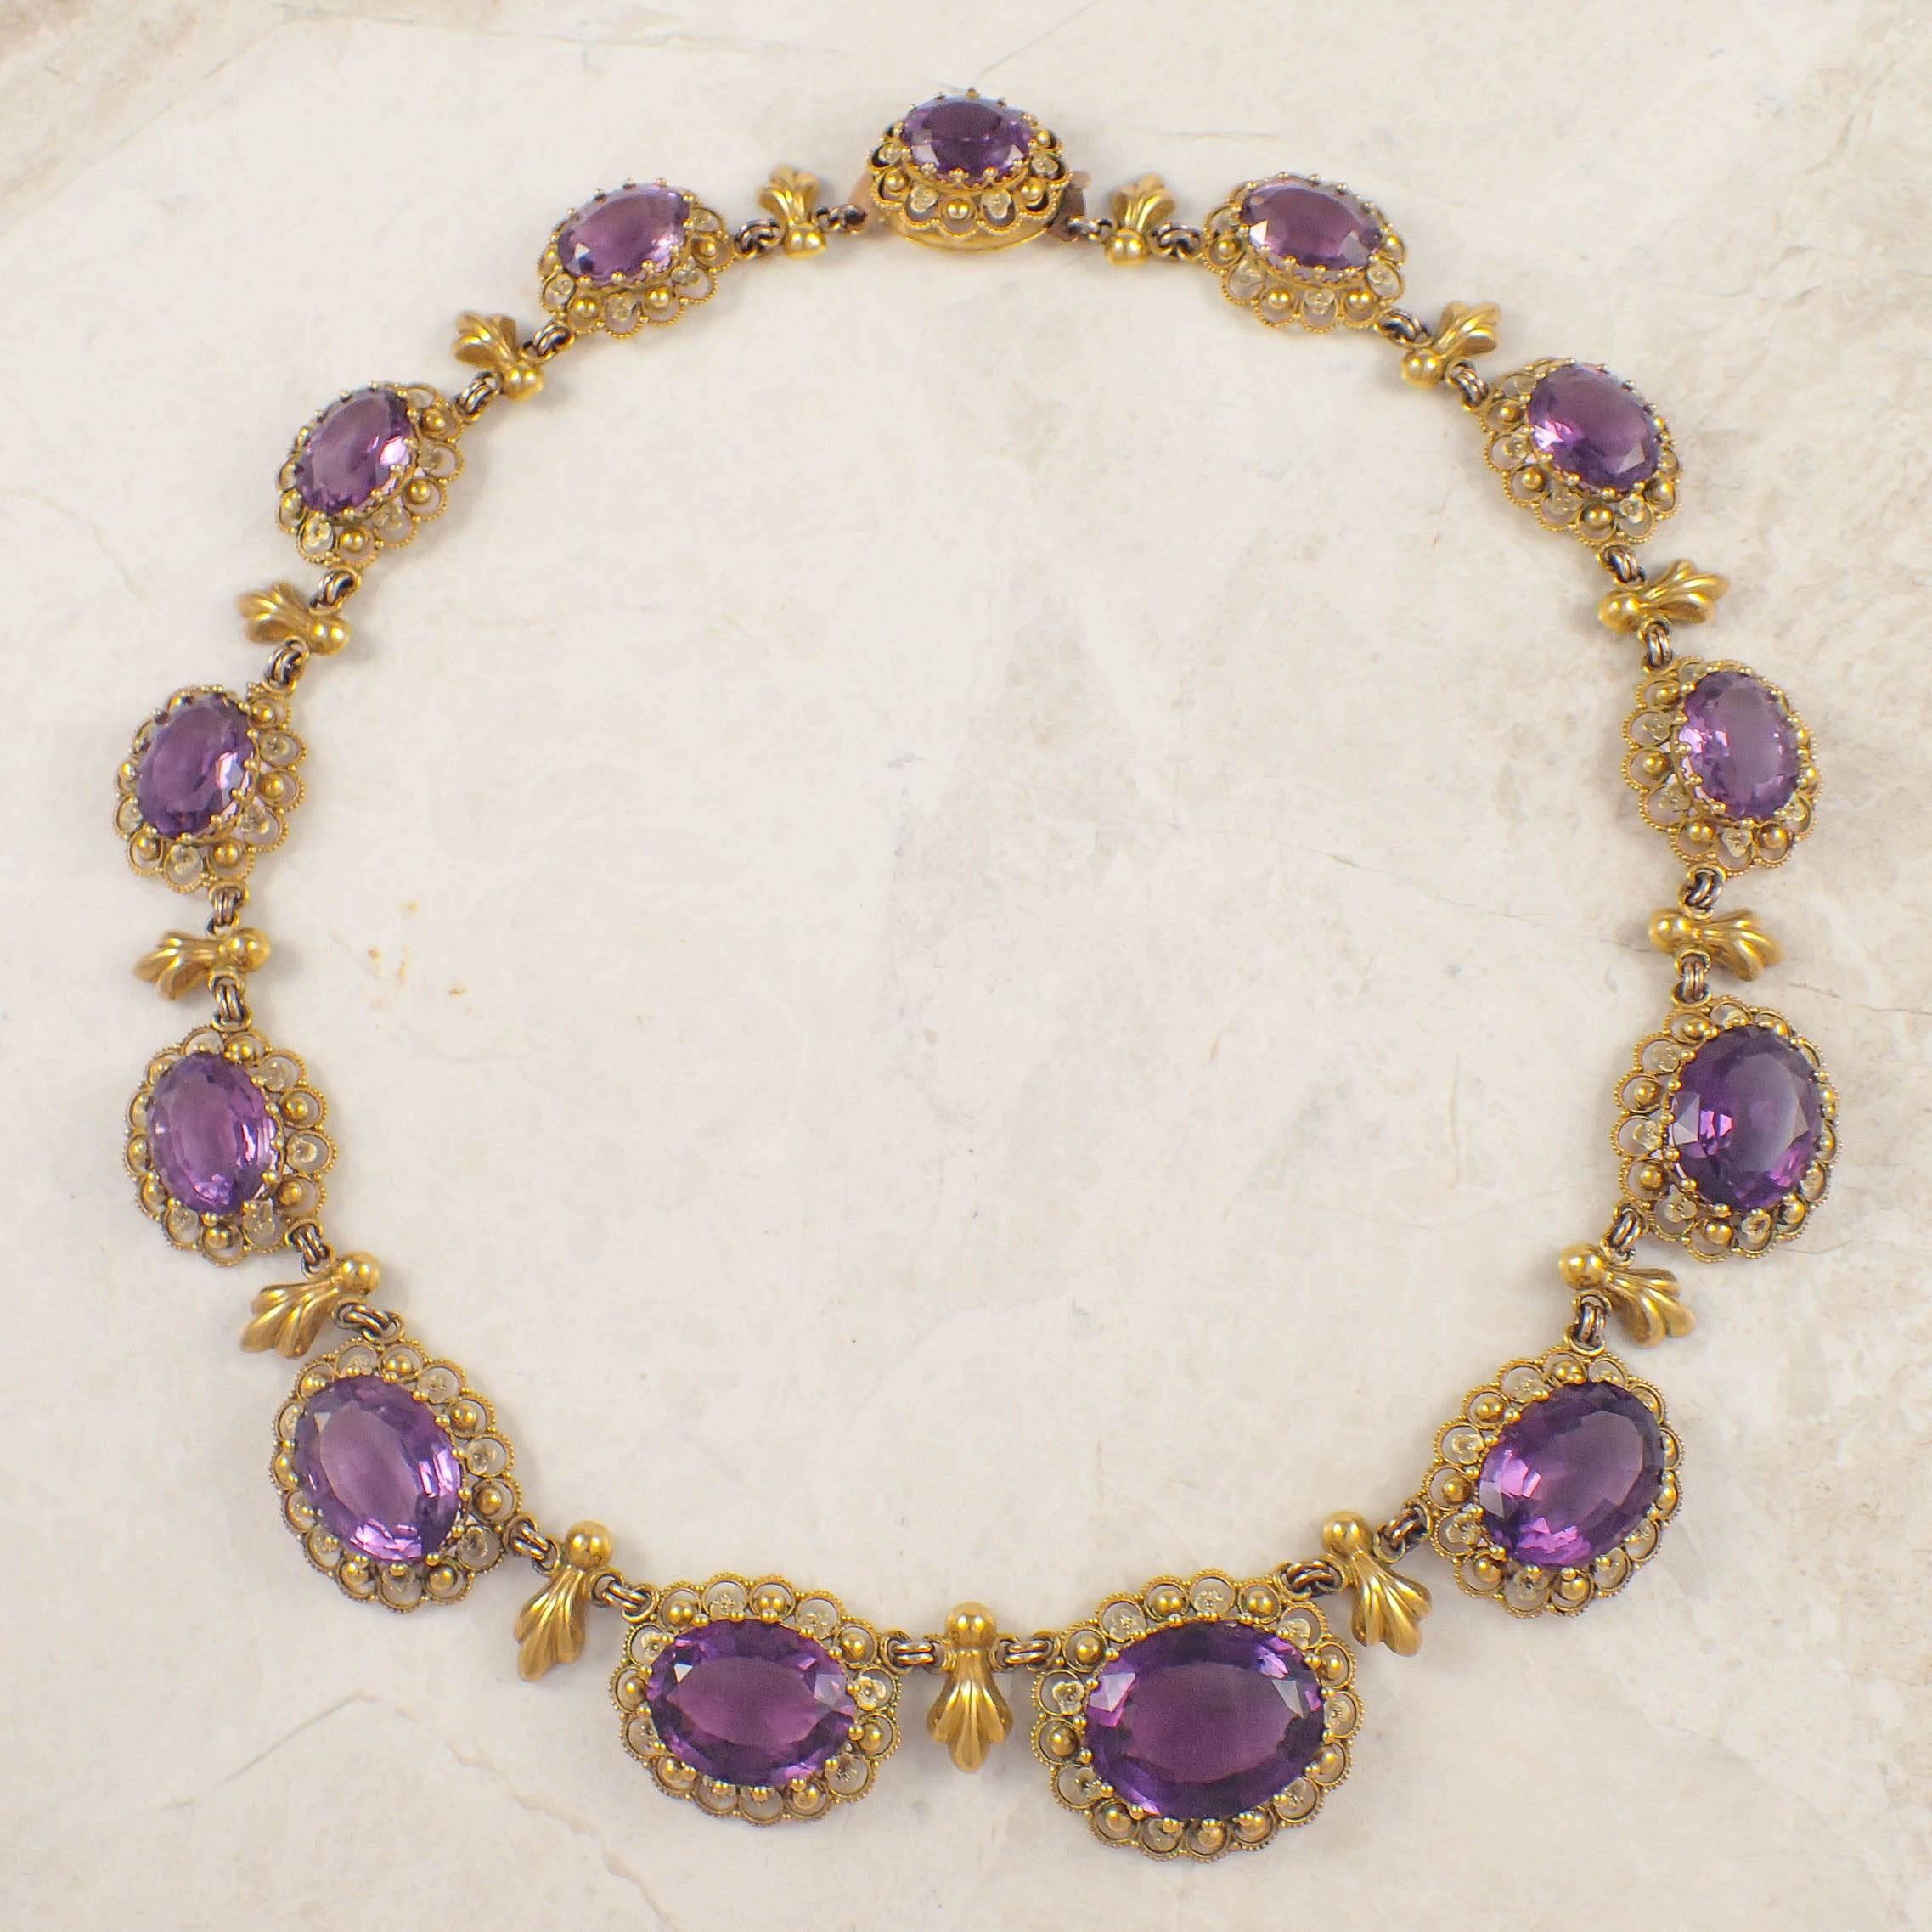 Antique 14k yellow gold amethyst necklace. The necklace is set with 13 graduated oval amethysts measuring from 20 X 15 mm to 12 X 10 mm. Each stone is set within an open work, twisted wire and granulated frame. The sections are connected by a